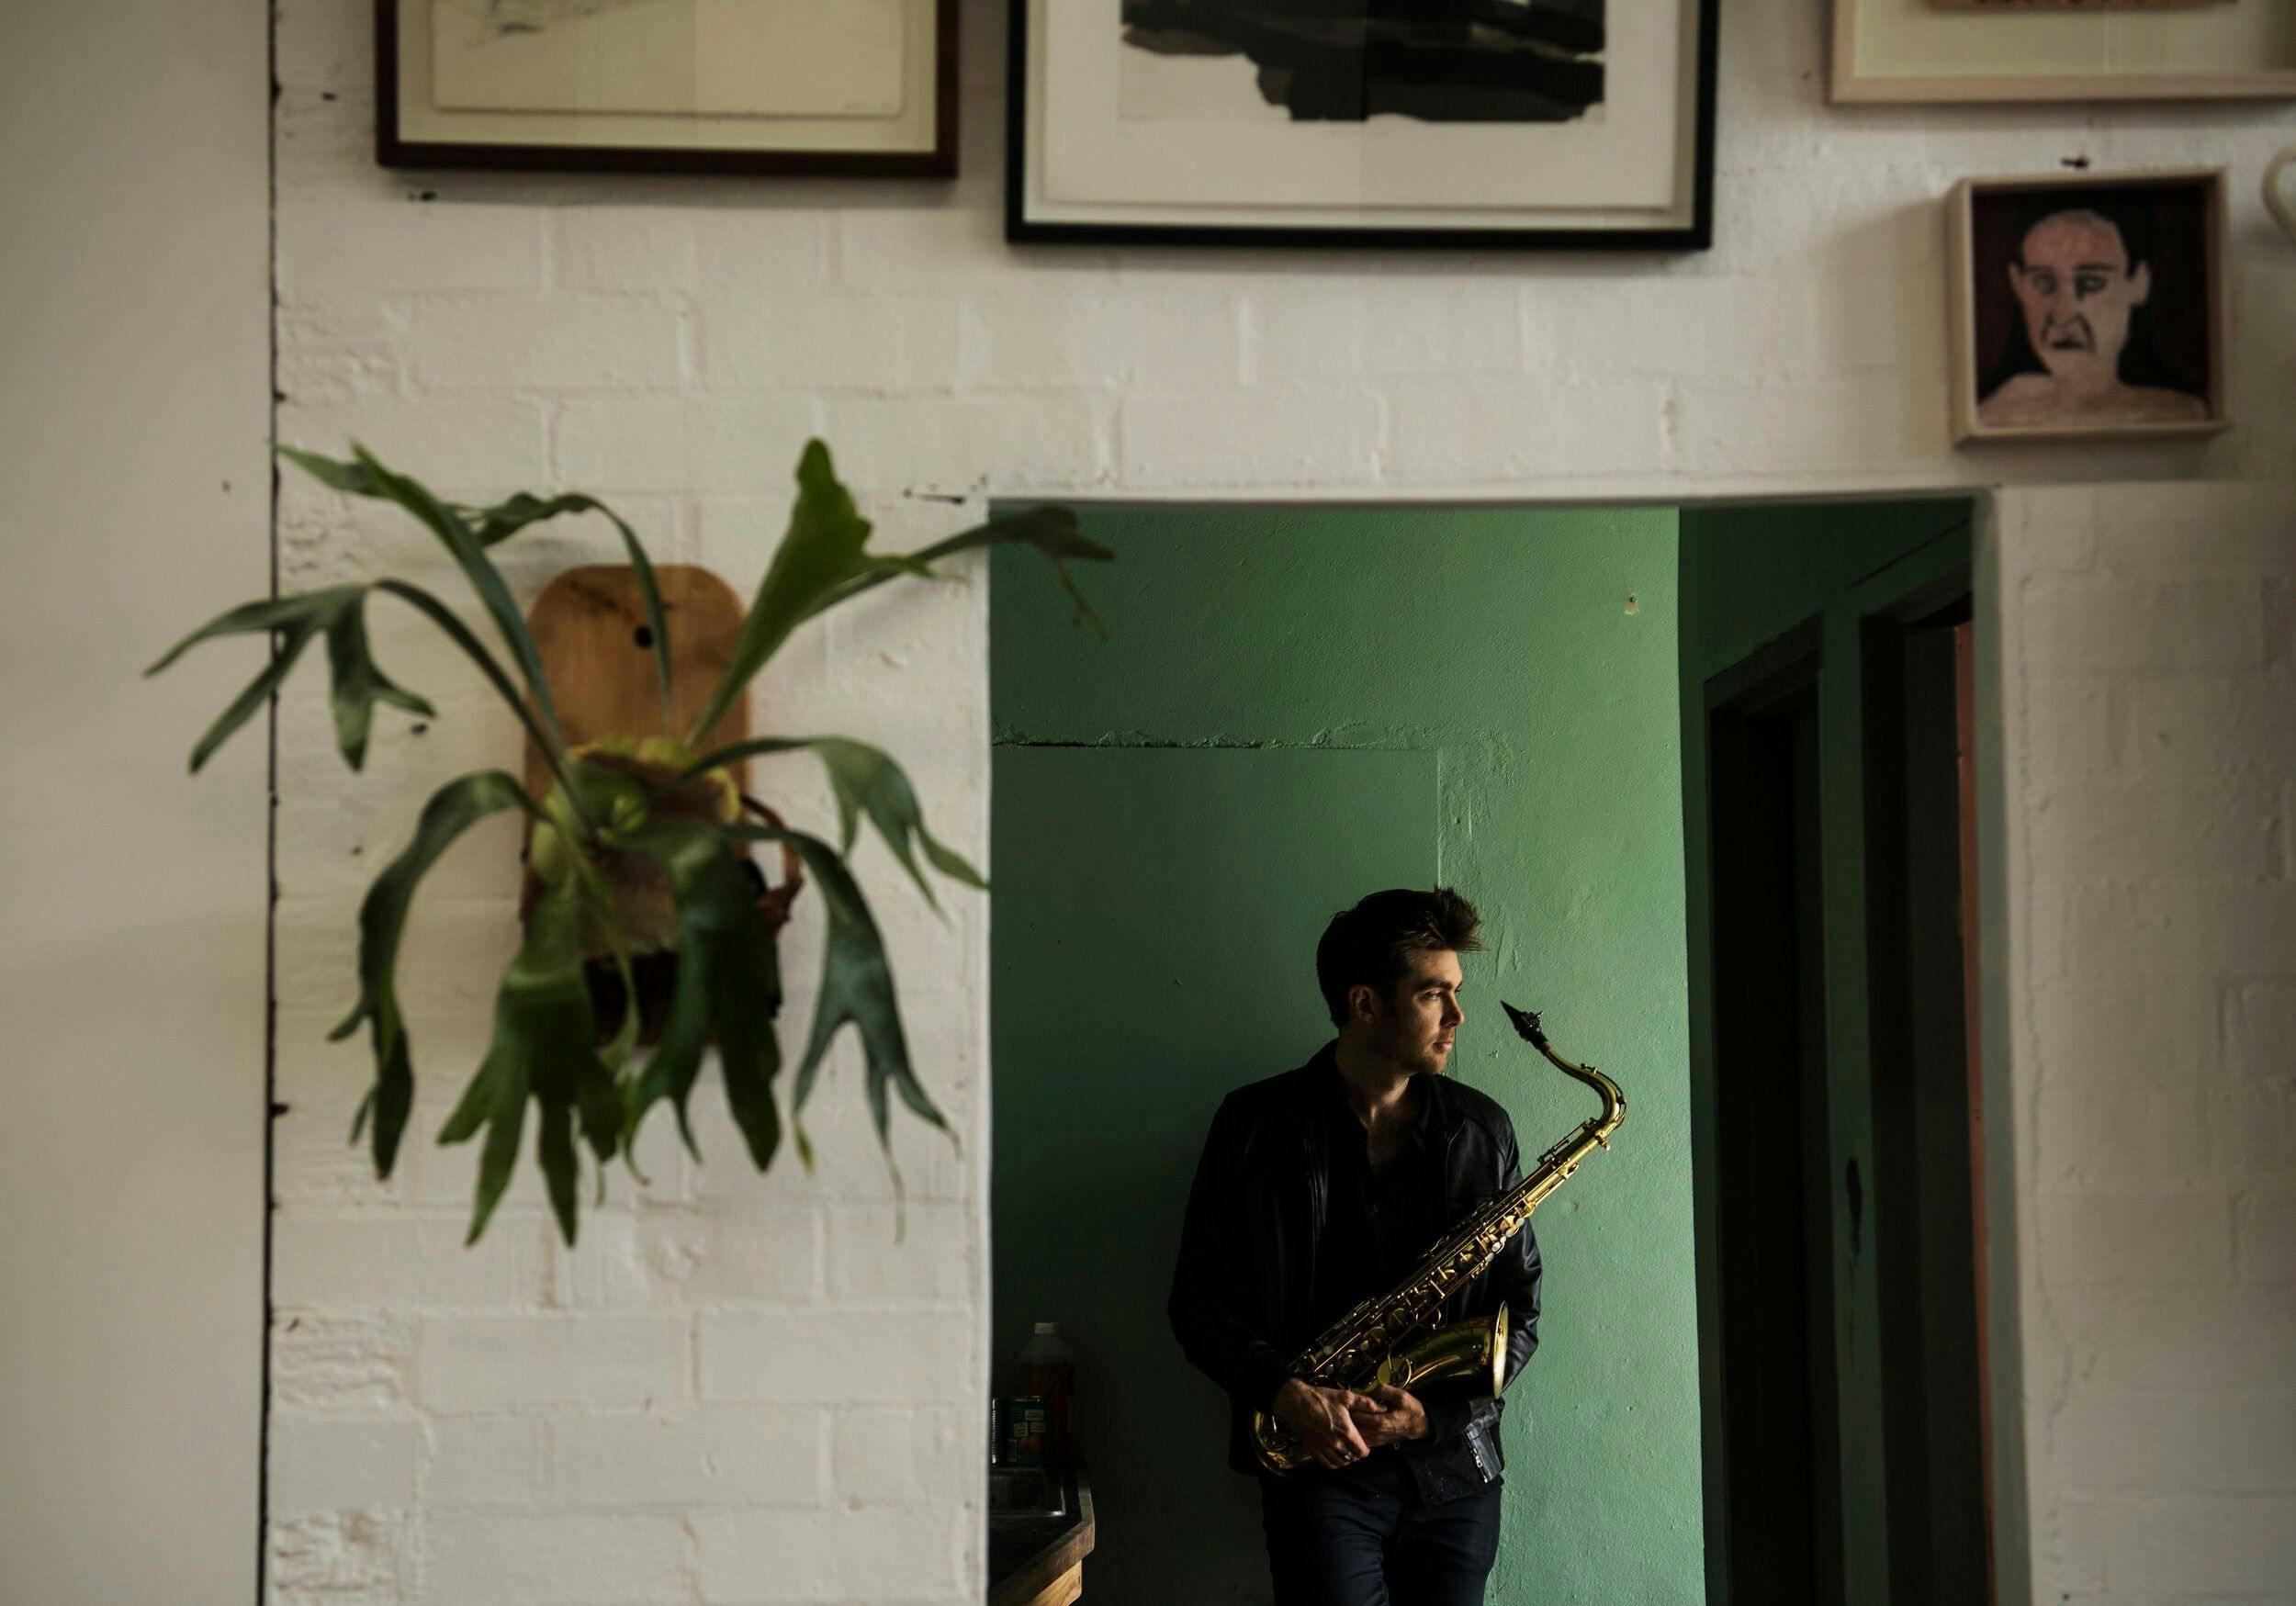 A man playing saxophone in a room with pictures on the wall.